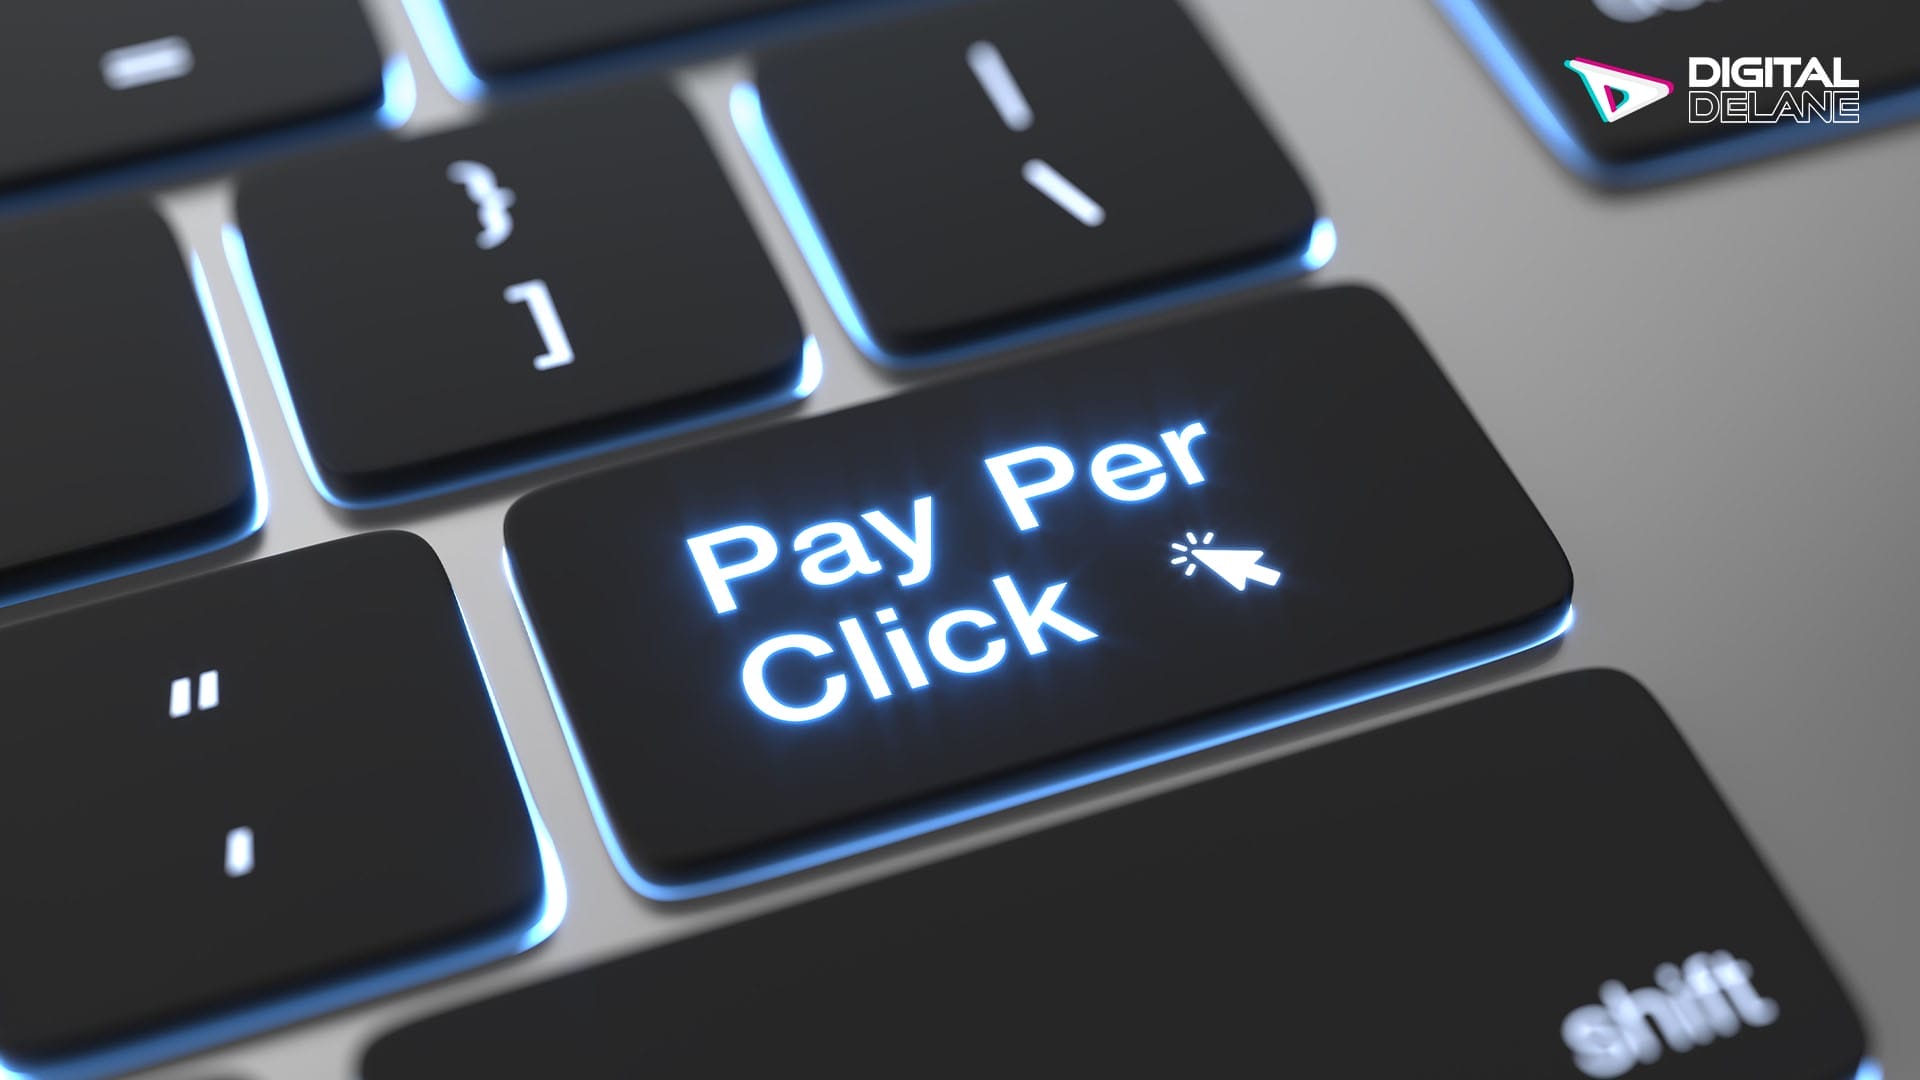 Importance of PPC in Digital Marketing